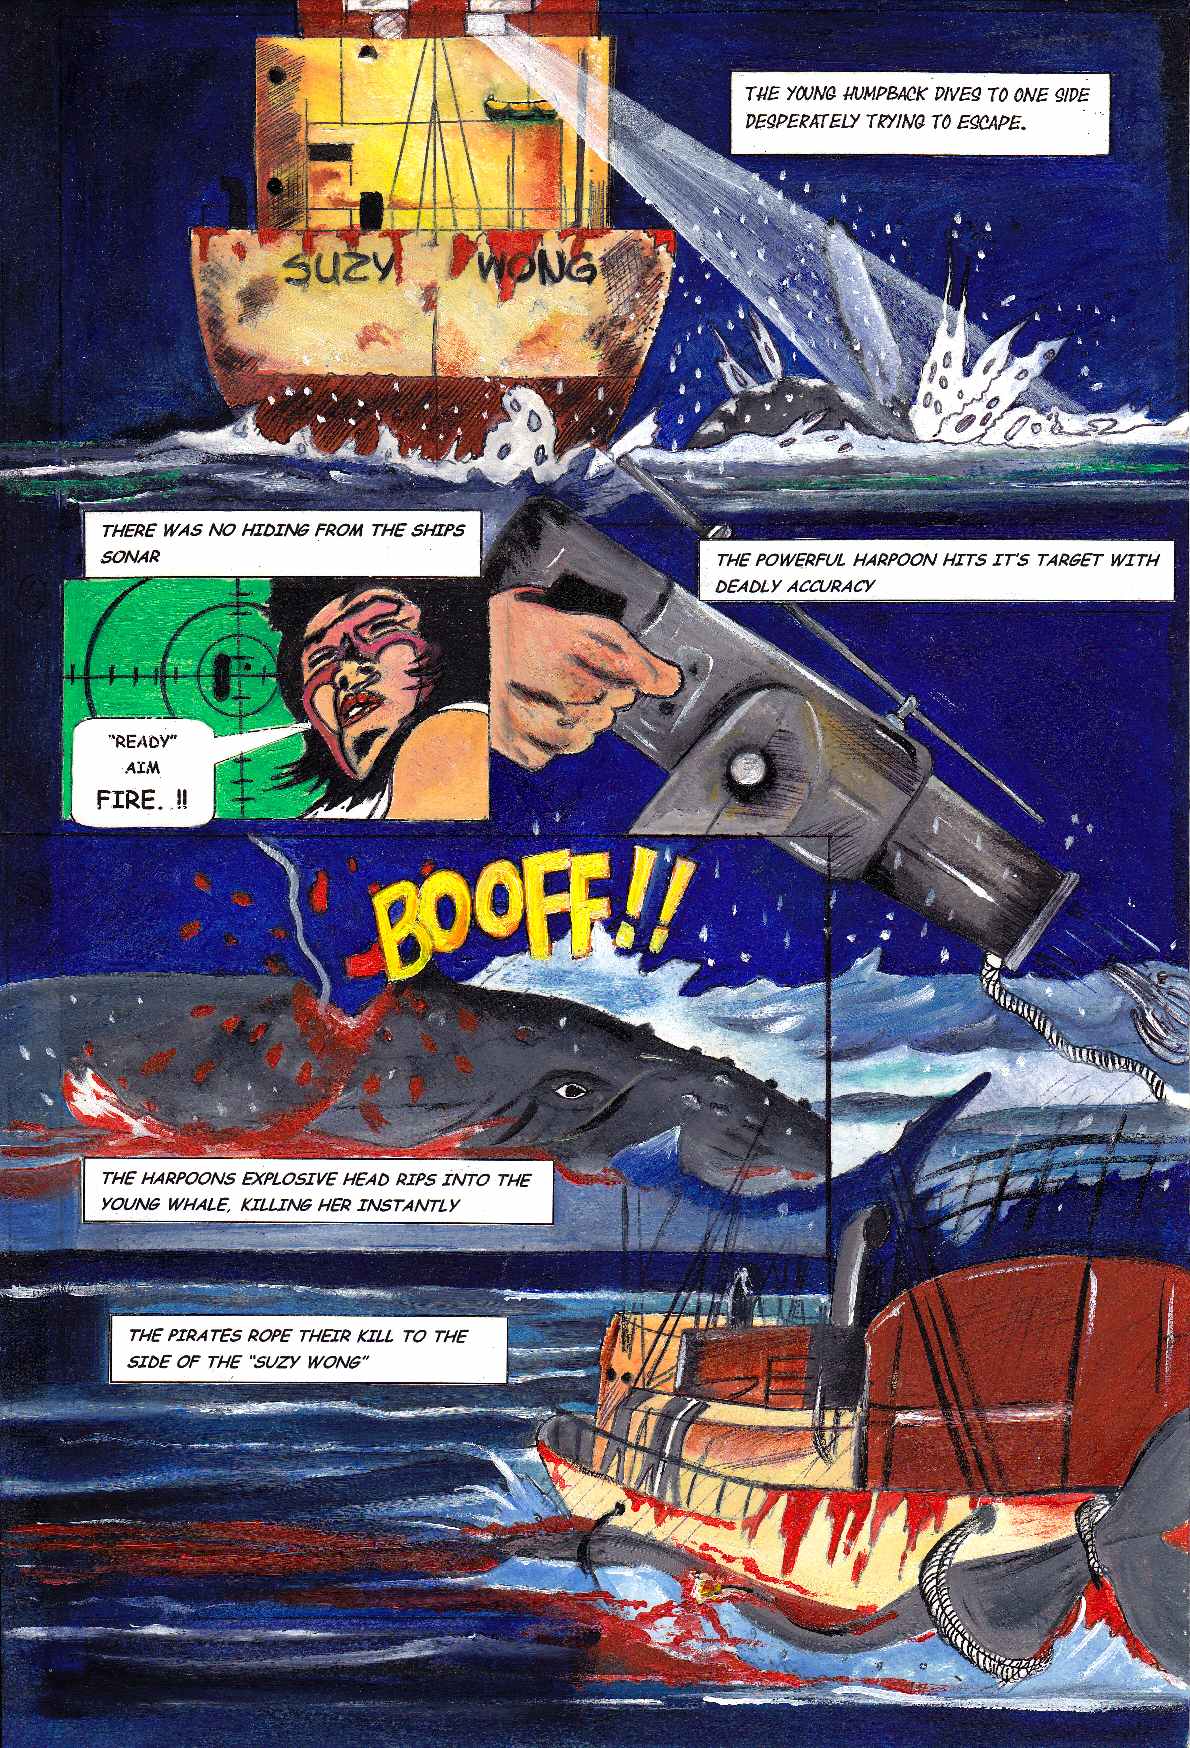 The Suzy Wong hunts down a small humpback whale called Kana and kills her with a harpoon